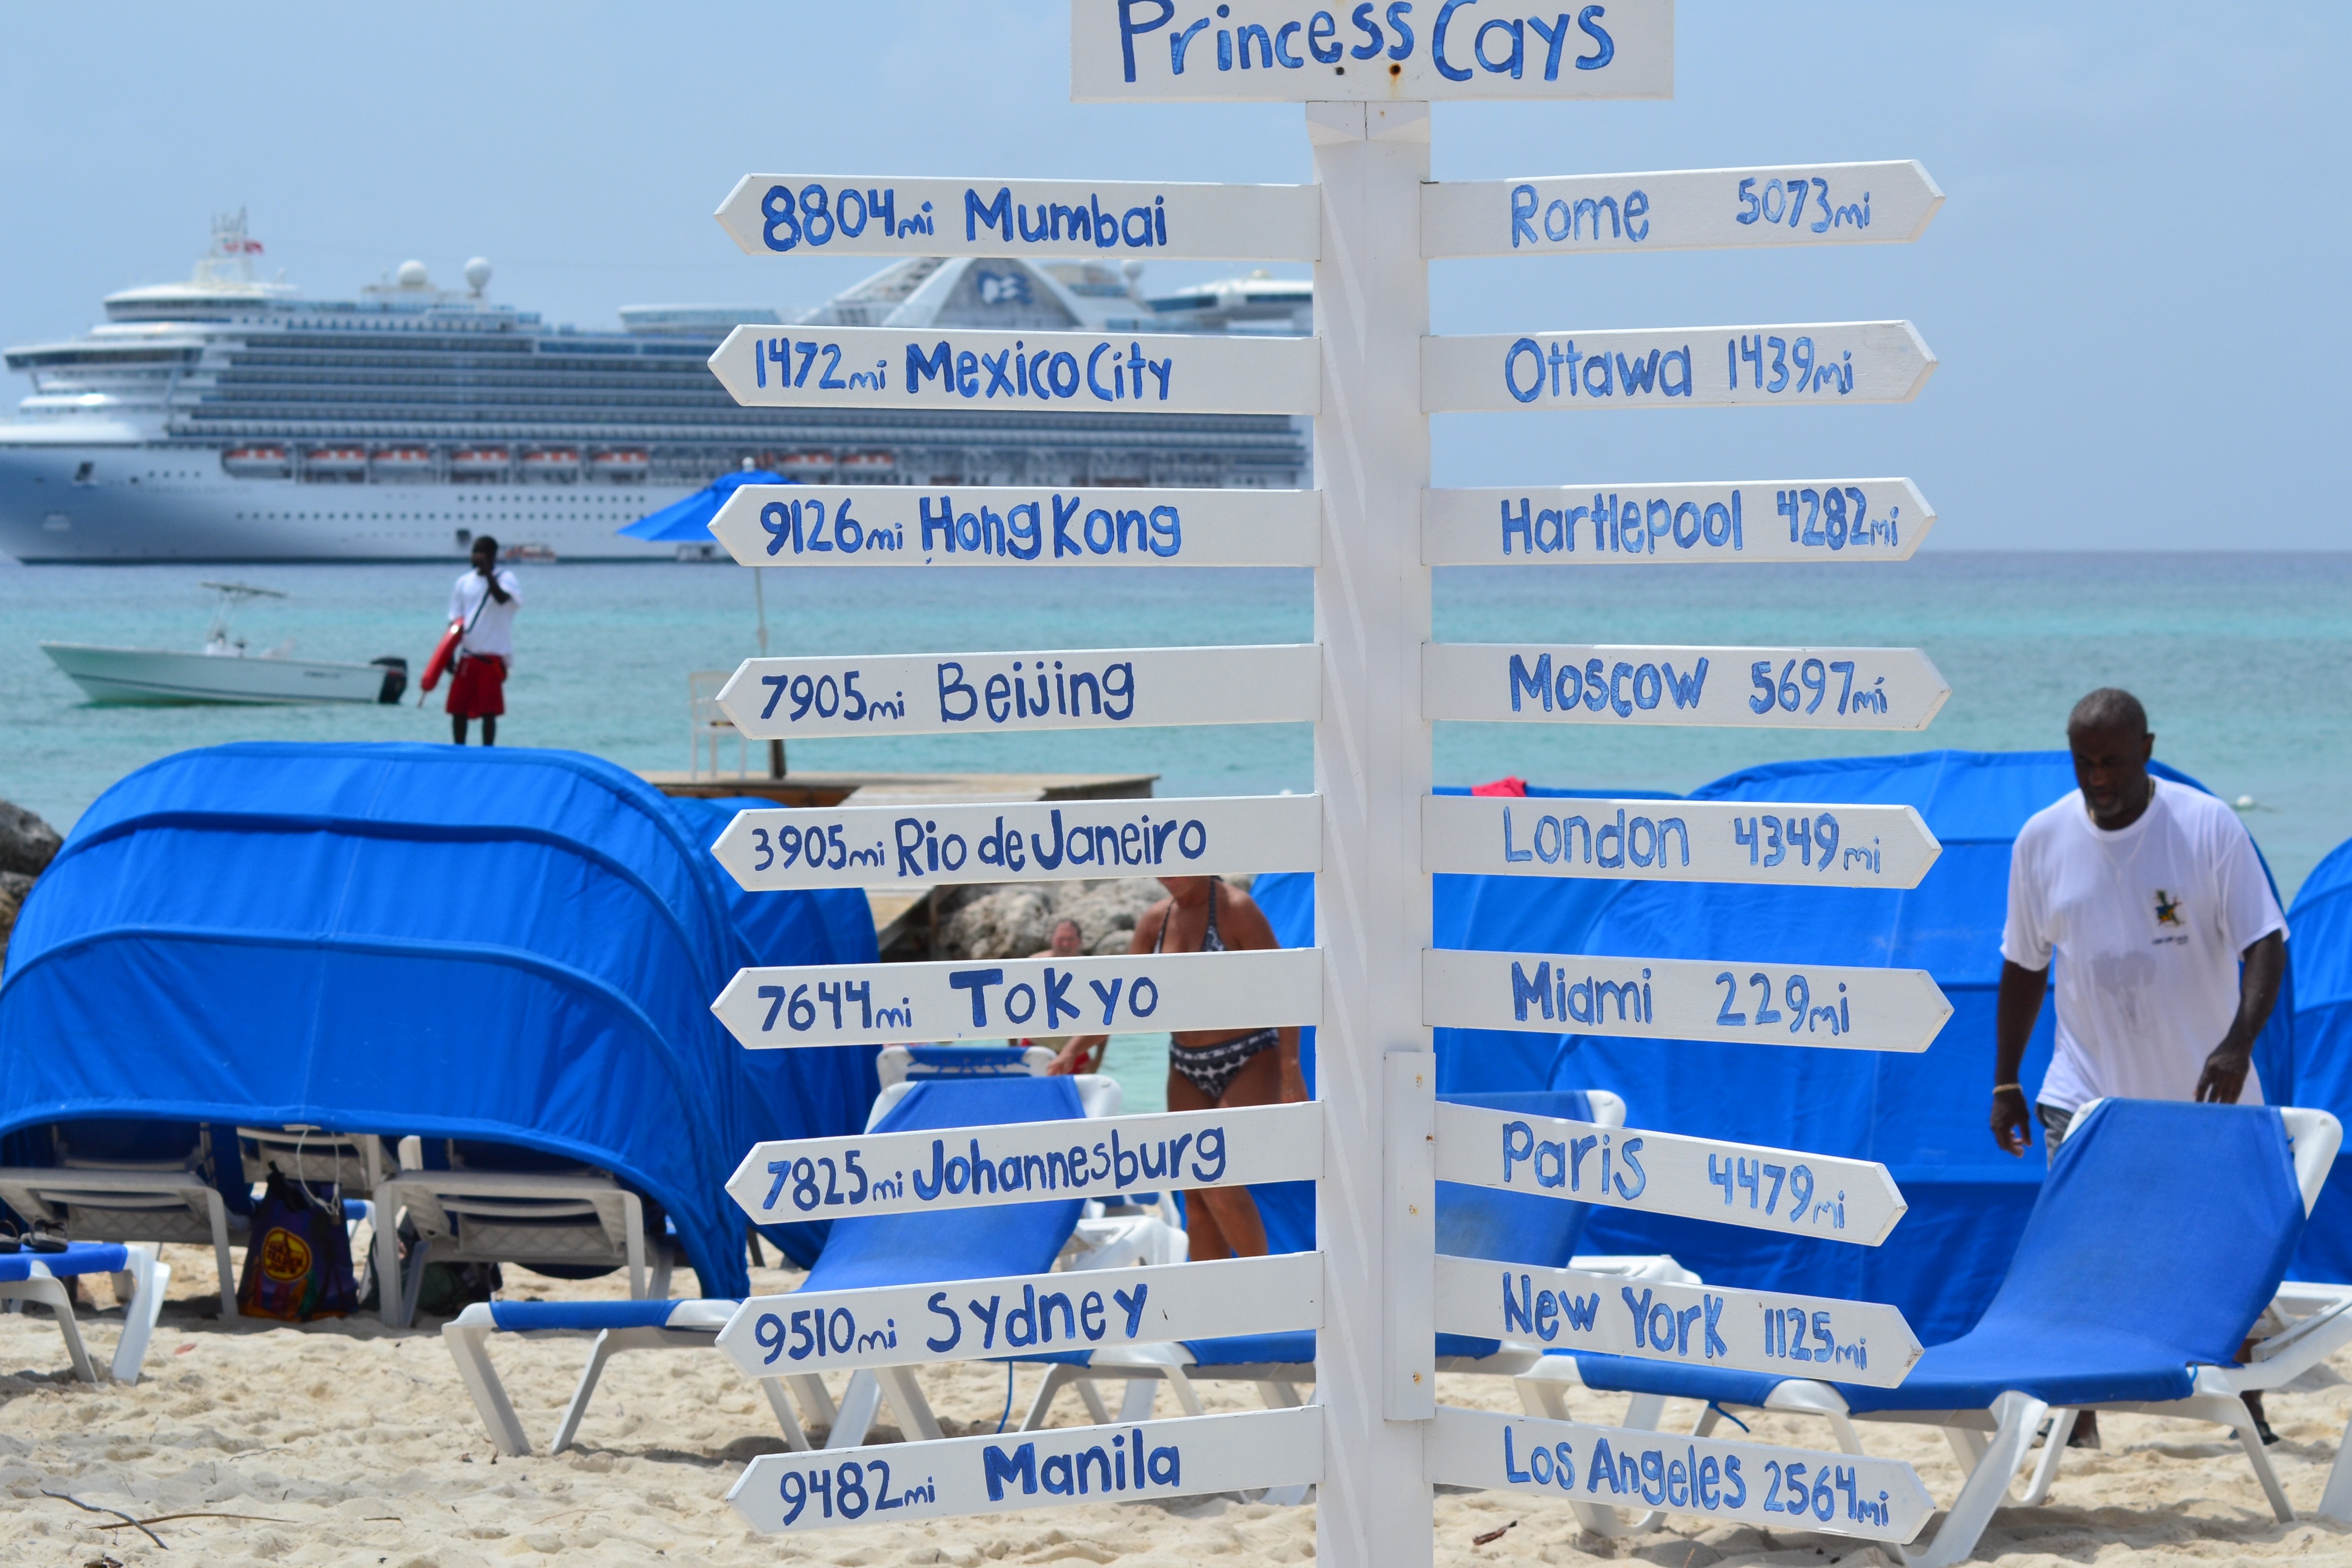 white princess cays post signage